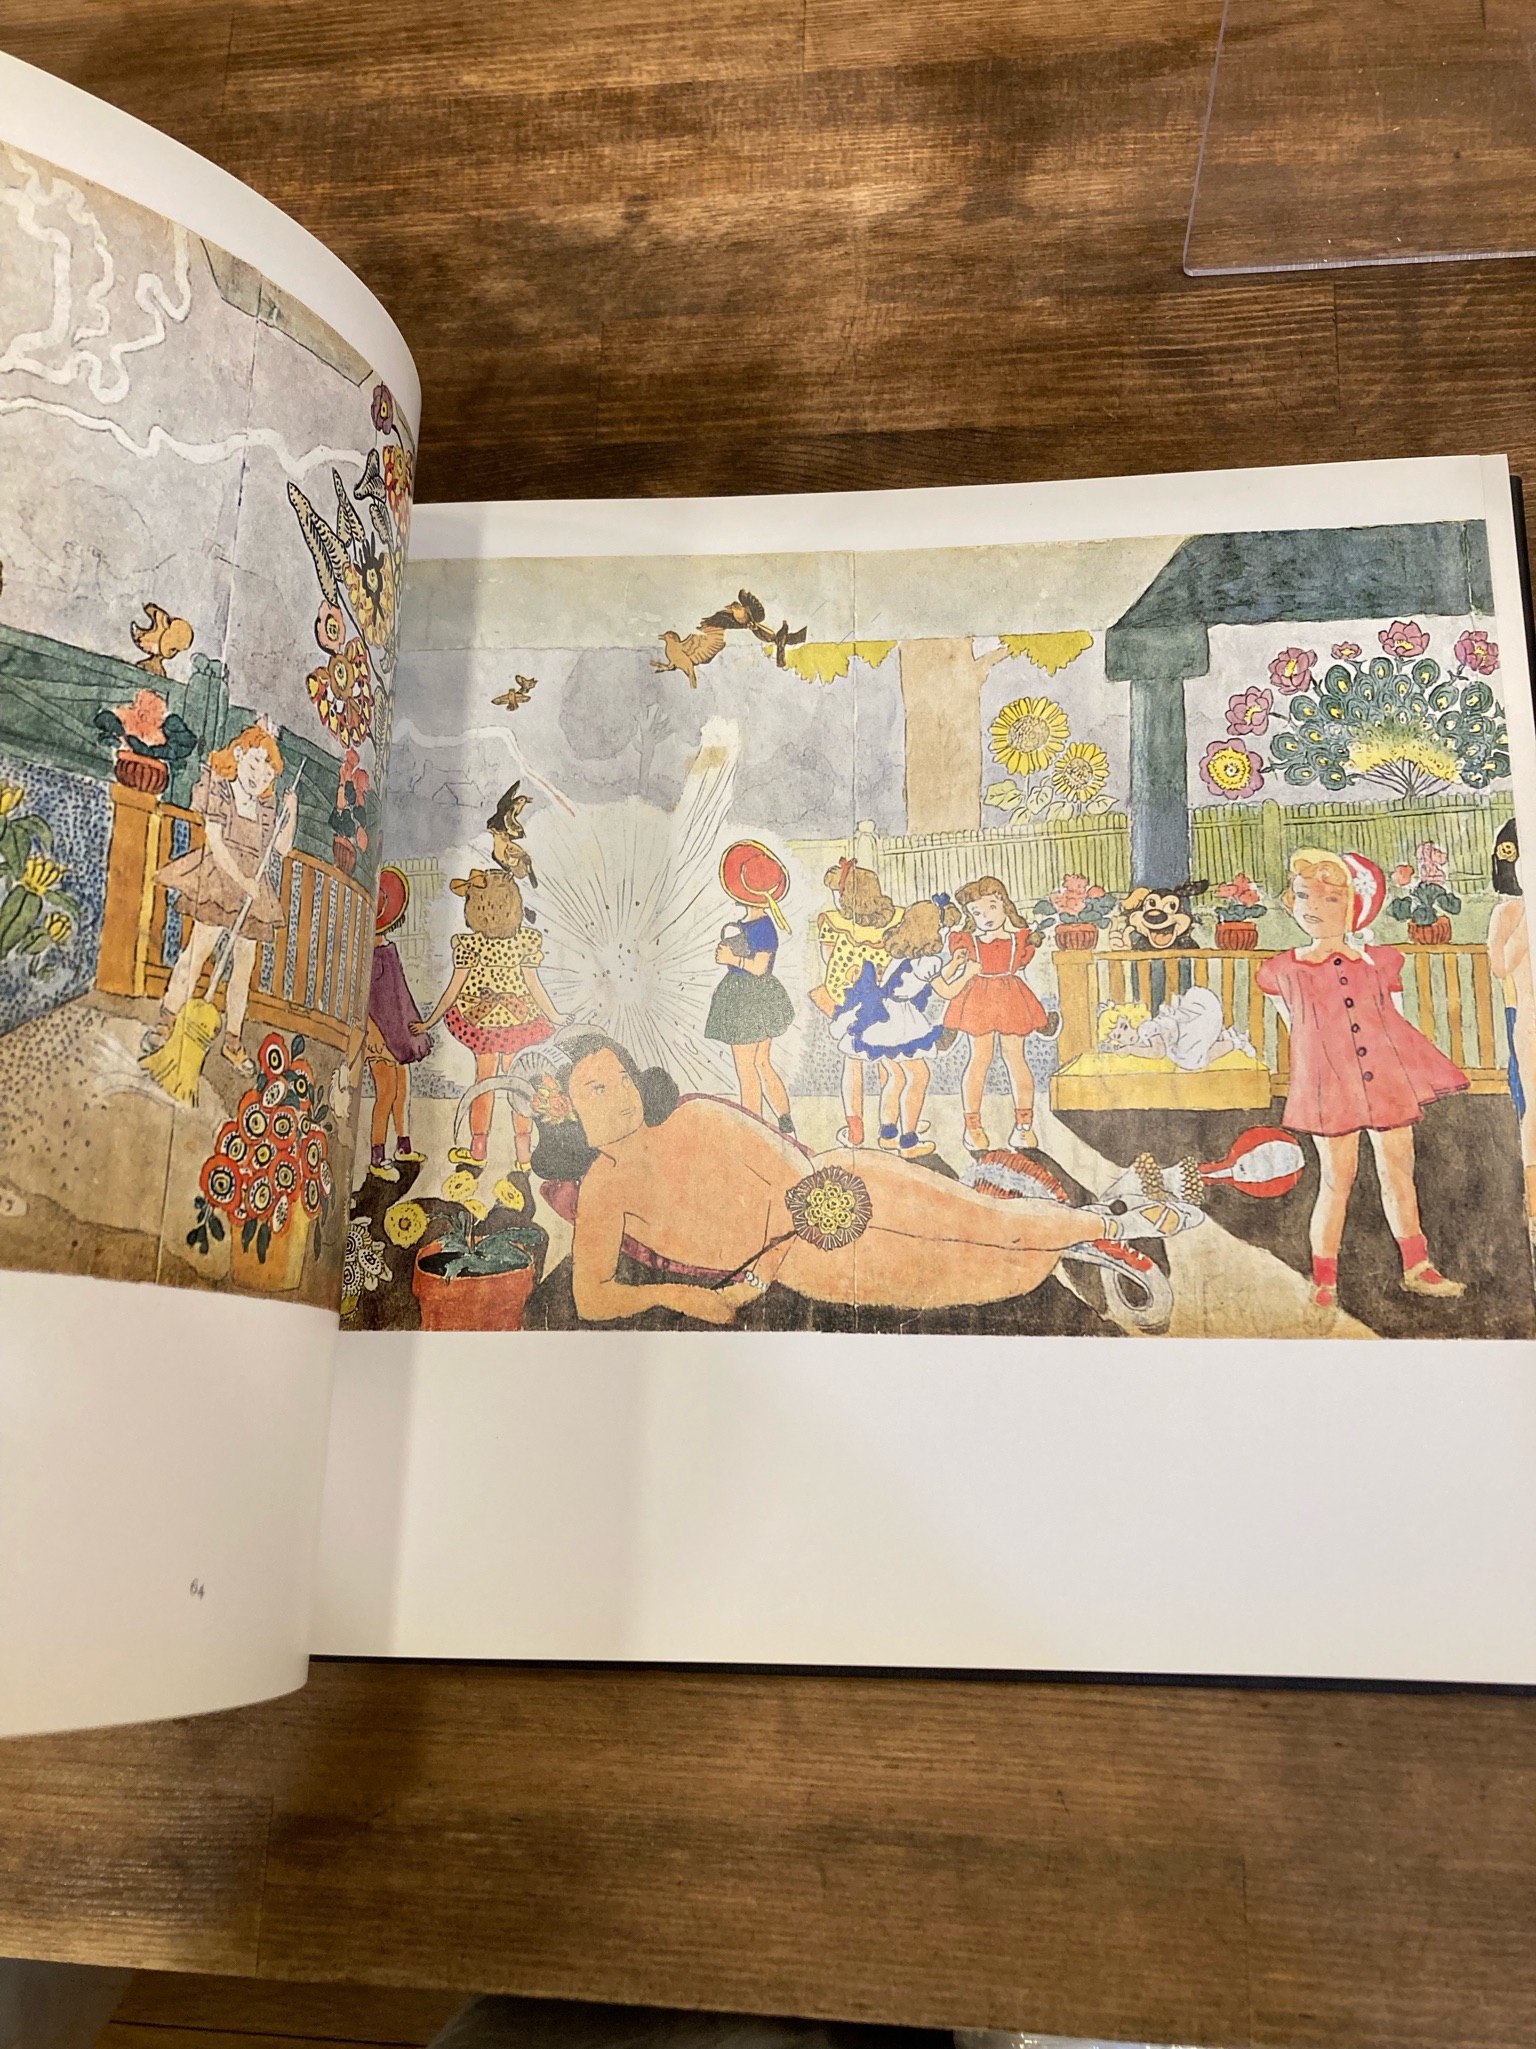 HENRY DARGER art and selected writings」 | 古本のんき